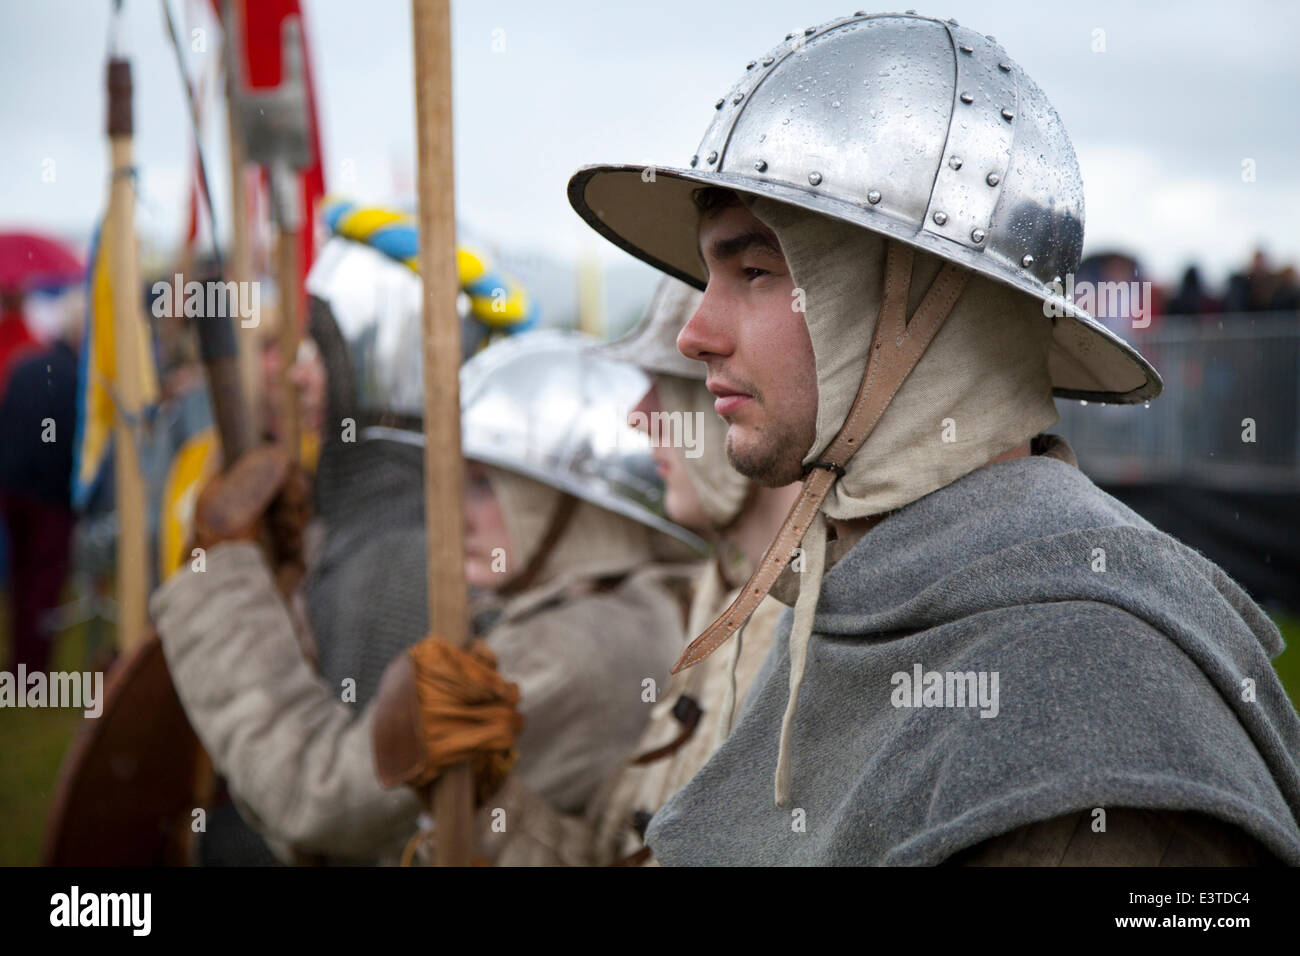 Stirling, UK. 28th June, 2014.  Pike men at the Battle of Bannockburn re-enactment. Thousands of people have turned out for a weekend of re-enactments and historical recreations.  The Battle was a Scottish victory in the First War of Scottish Independence.  Stirling Castle, a Scots royal fortress, occupied by the English, was under siege by the Scottish army. Edward II of England assembled a force to relieve it which failed, and his army was defeated in battle by a smaller army commanded by Robert the Bruce of Scotland. Stock Photo